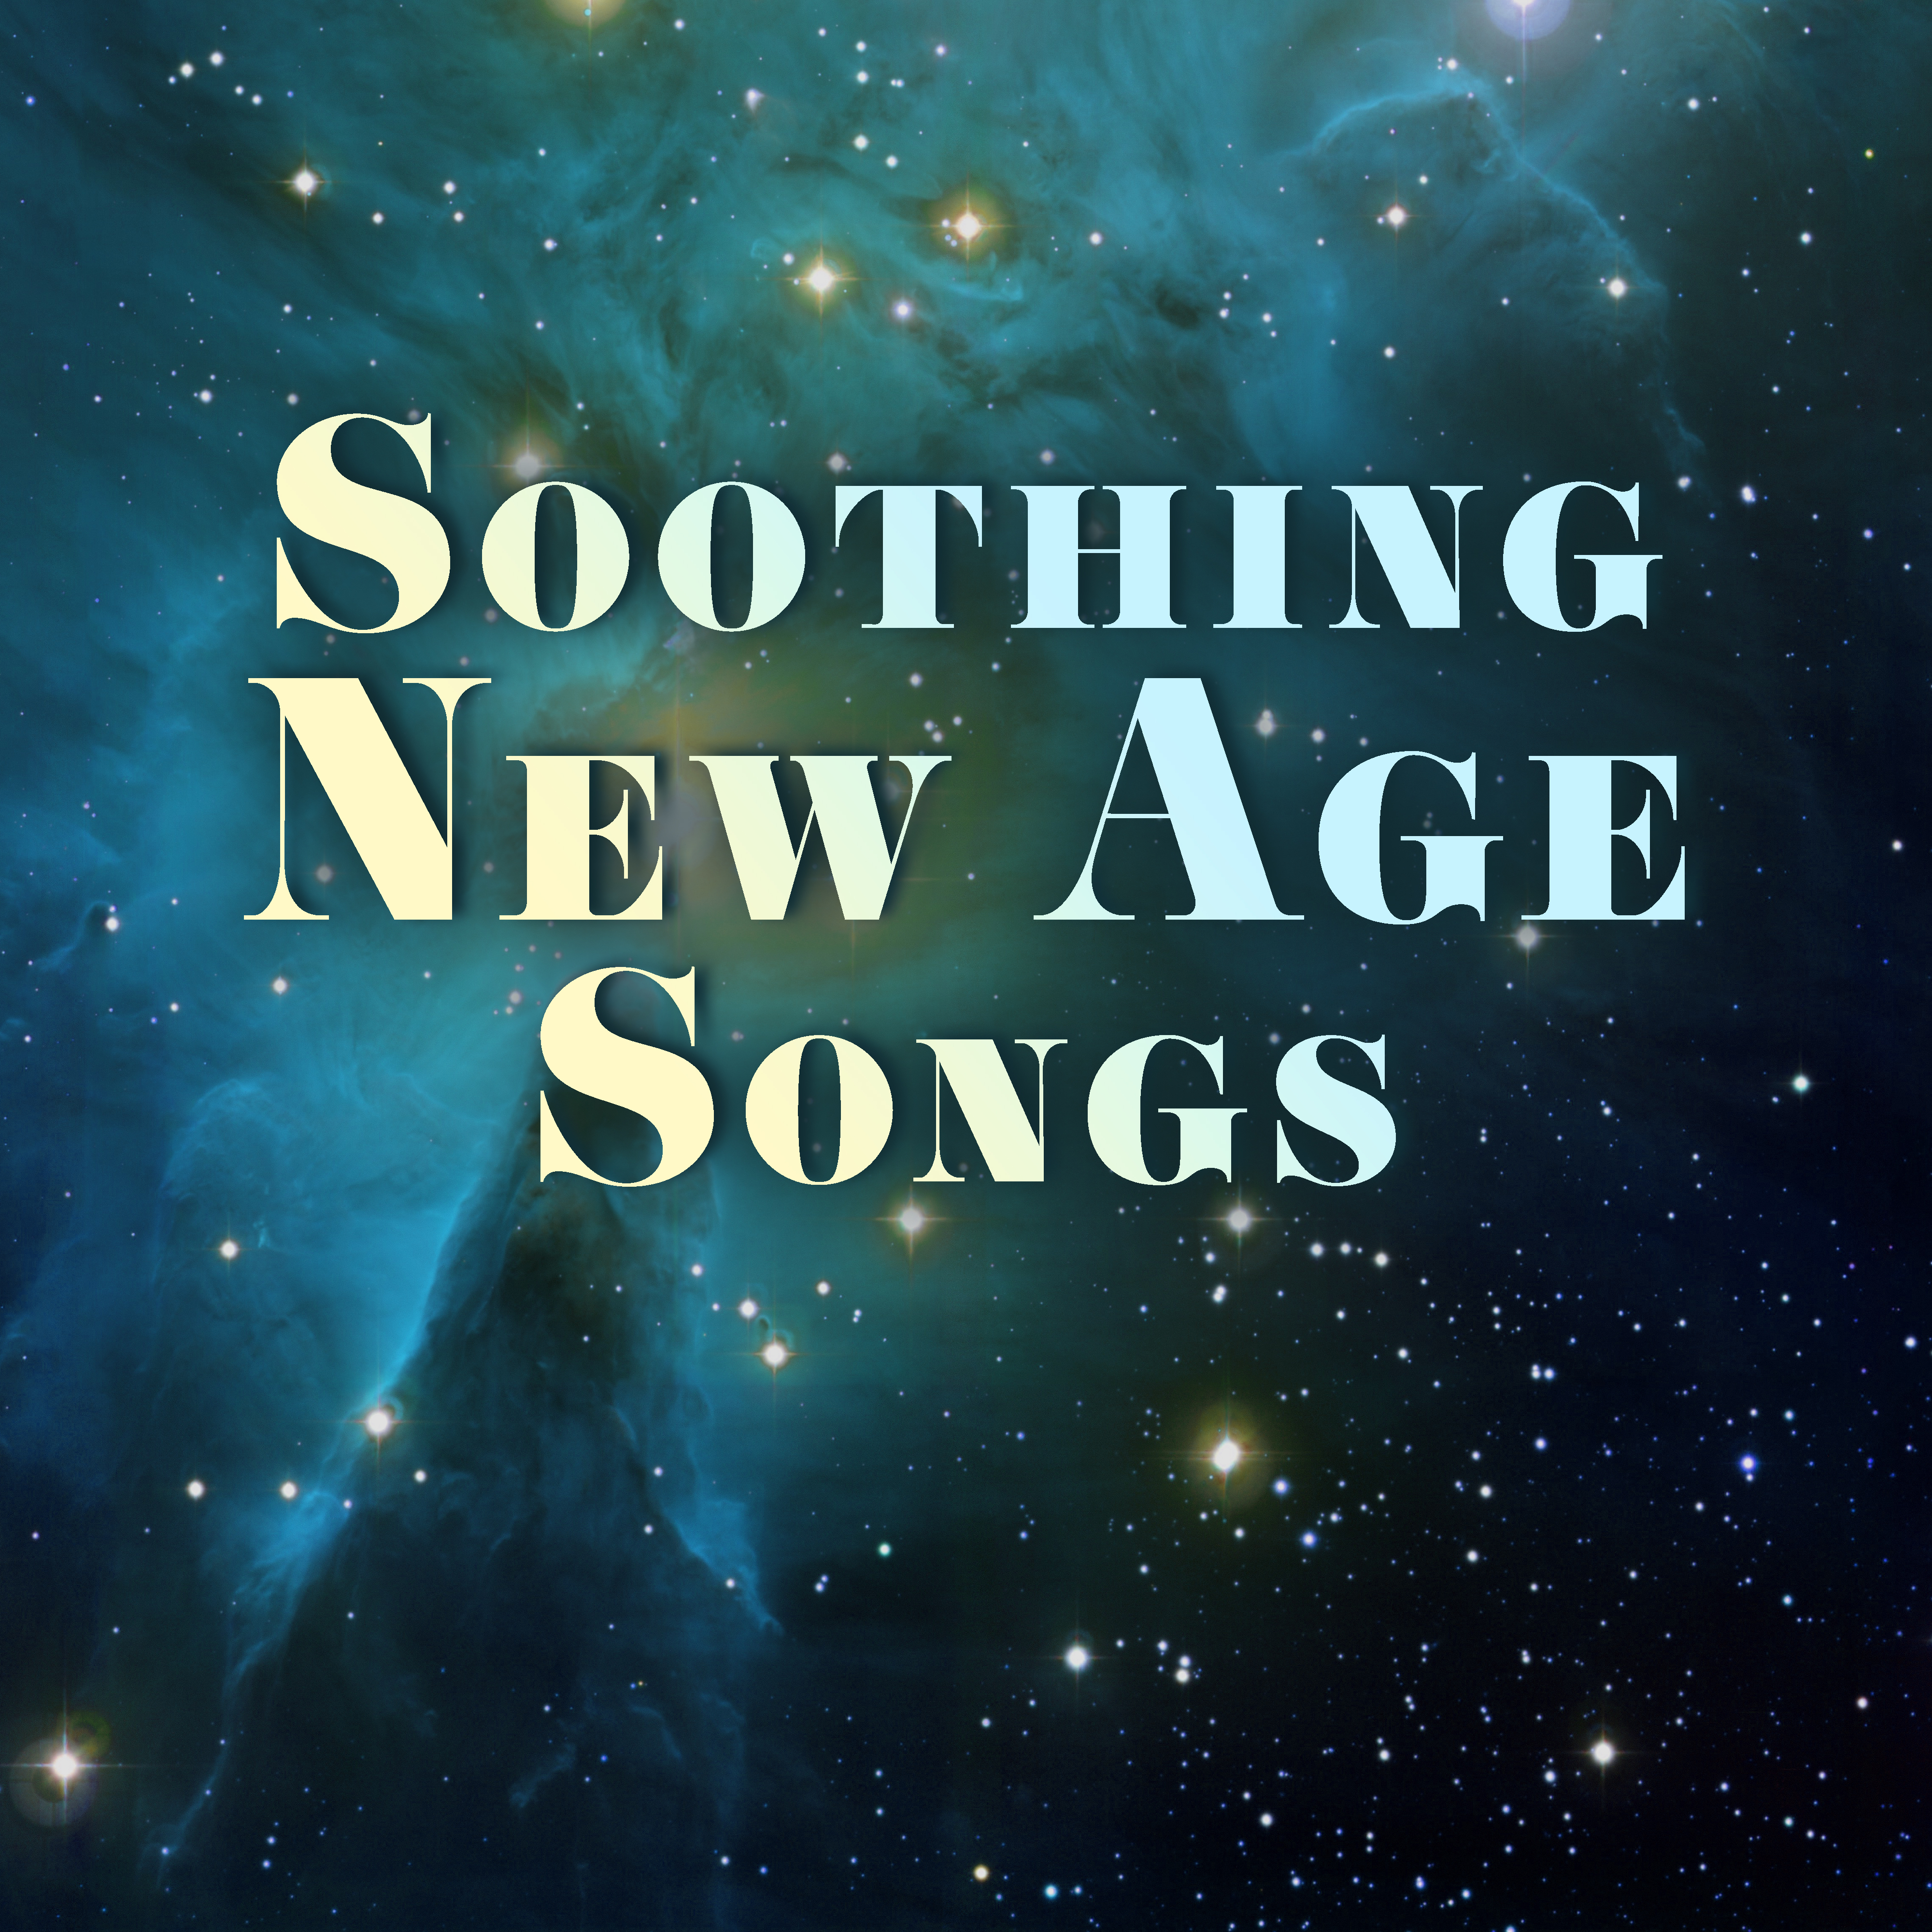 Soothing New Age Songs  Calm Melodies for Dreaming, Relaxing Sounds, Music to Rest, New Age for Sleep